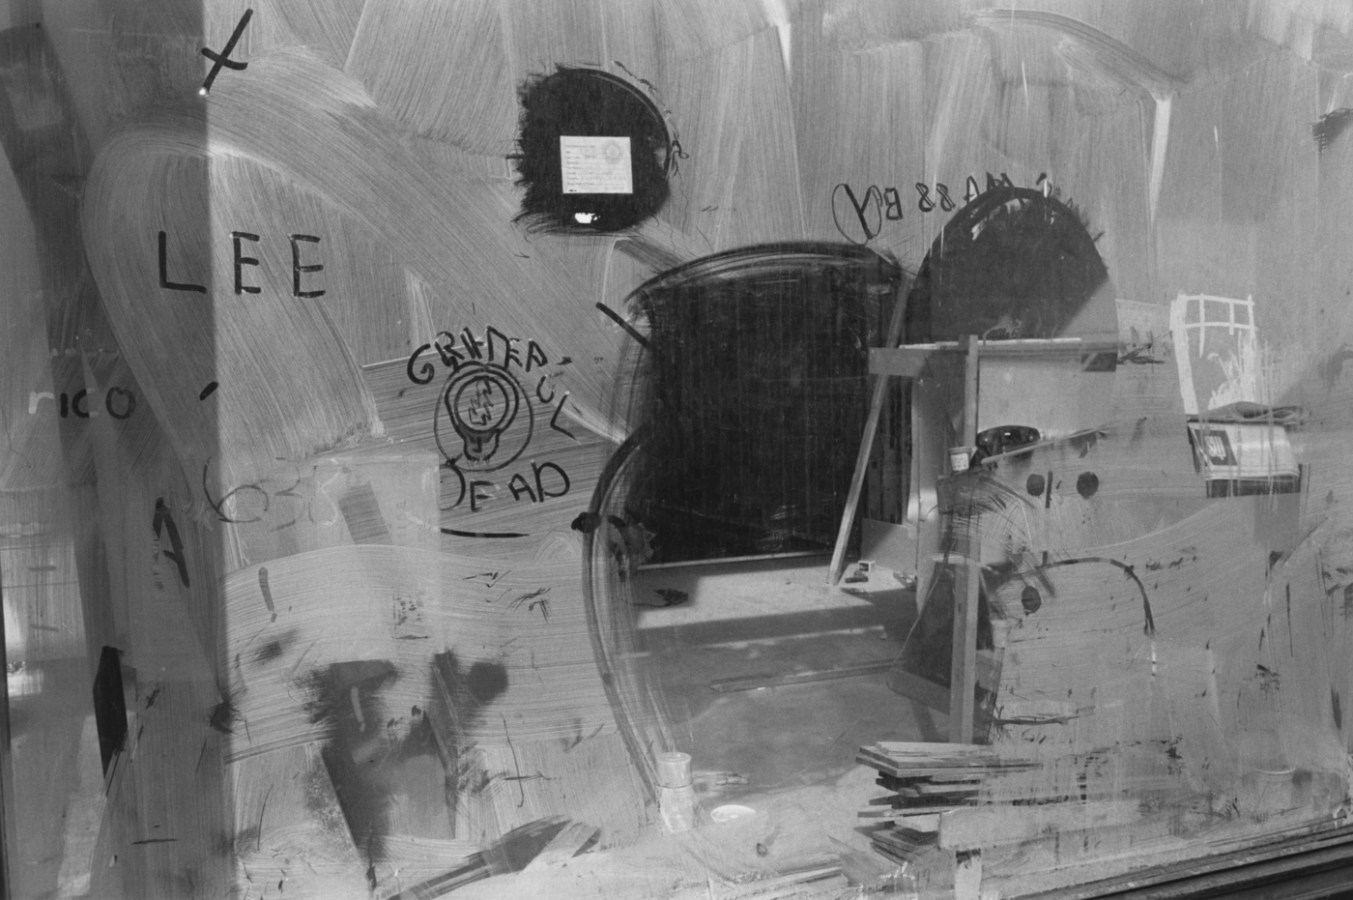 Black and white photograph of a storefront window with graffiti